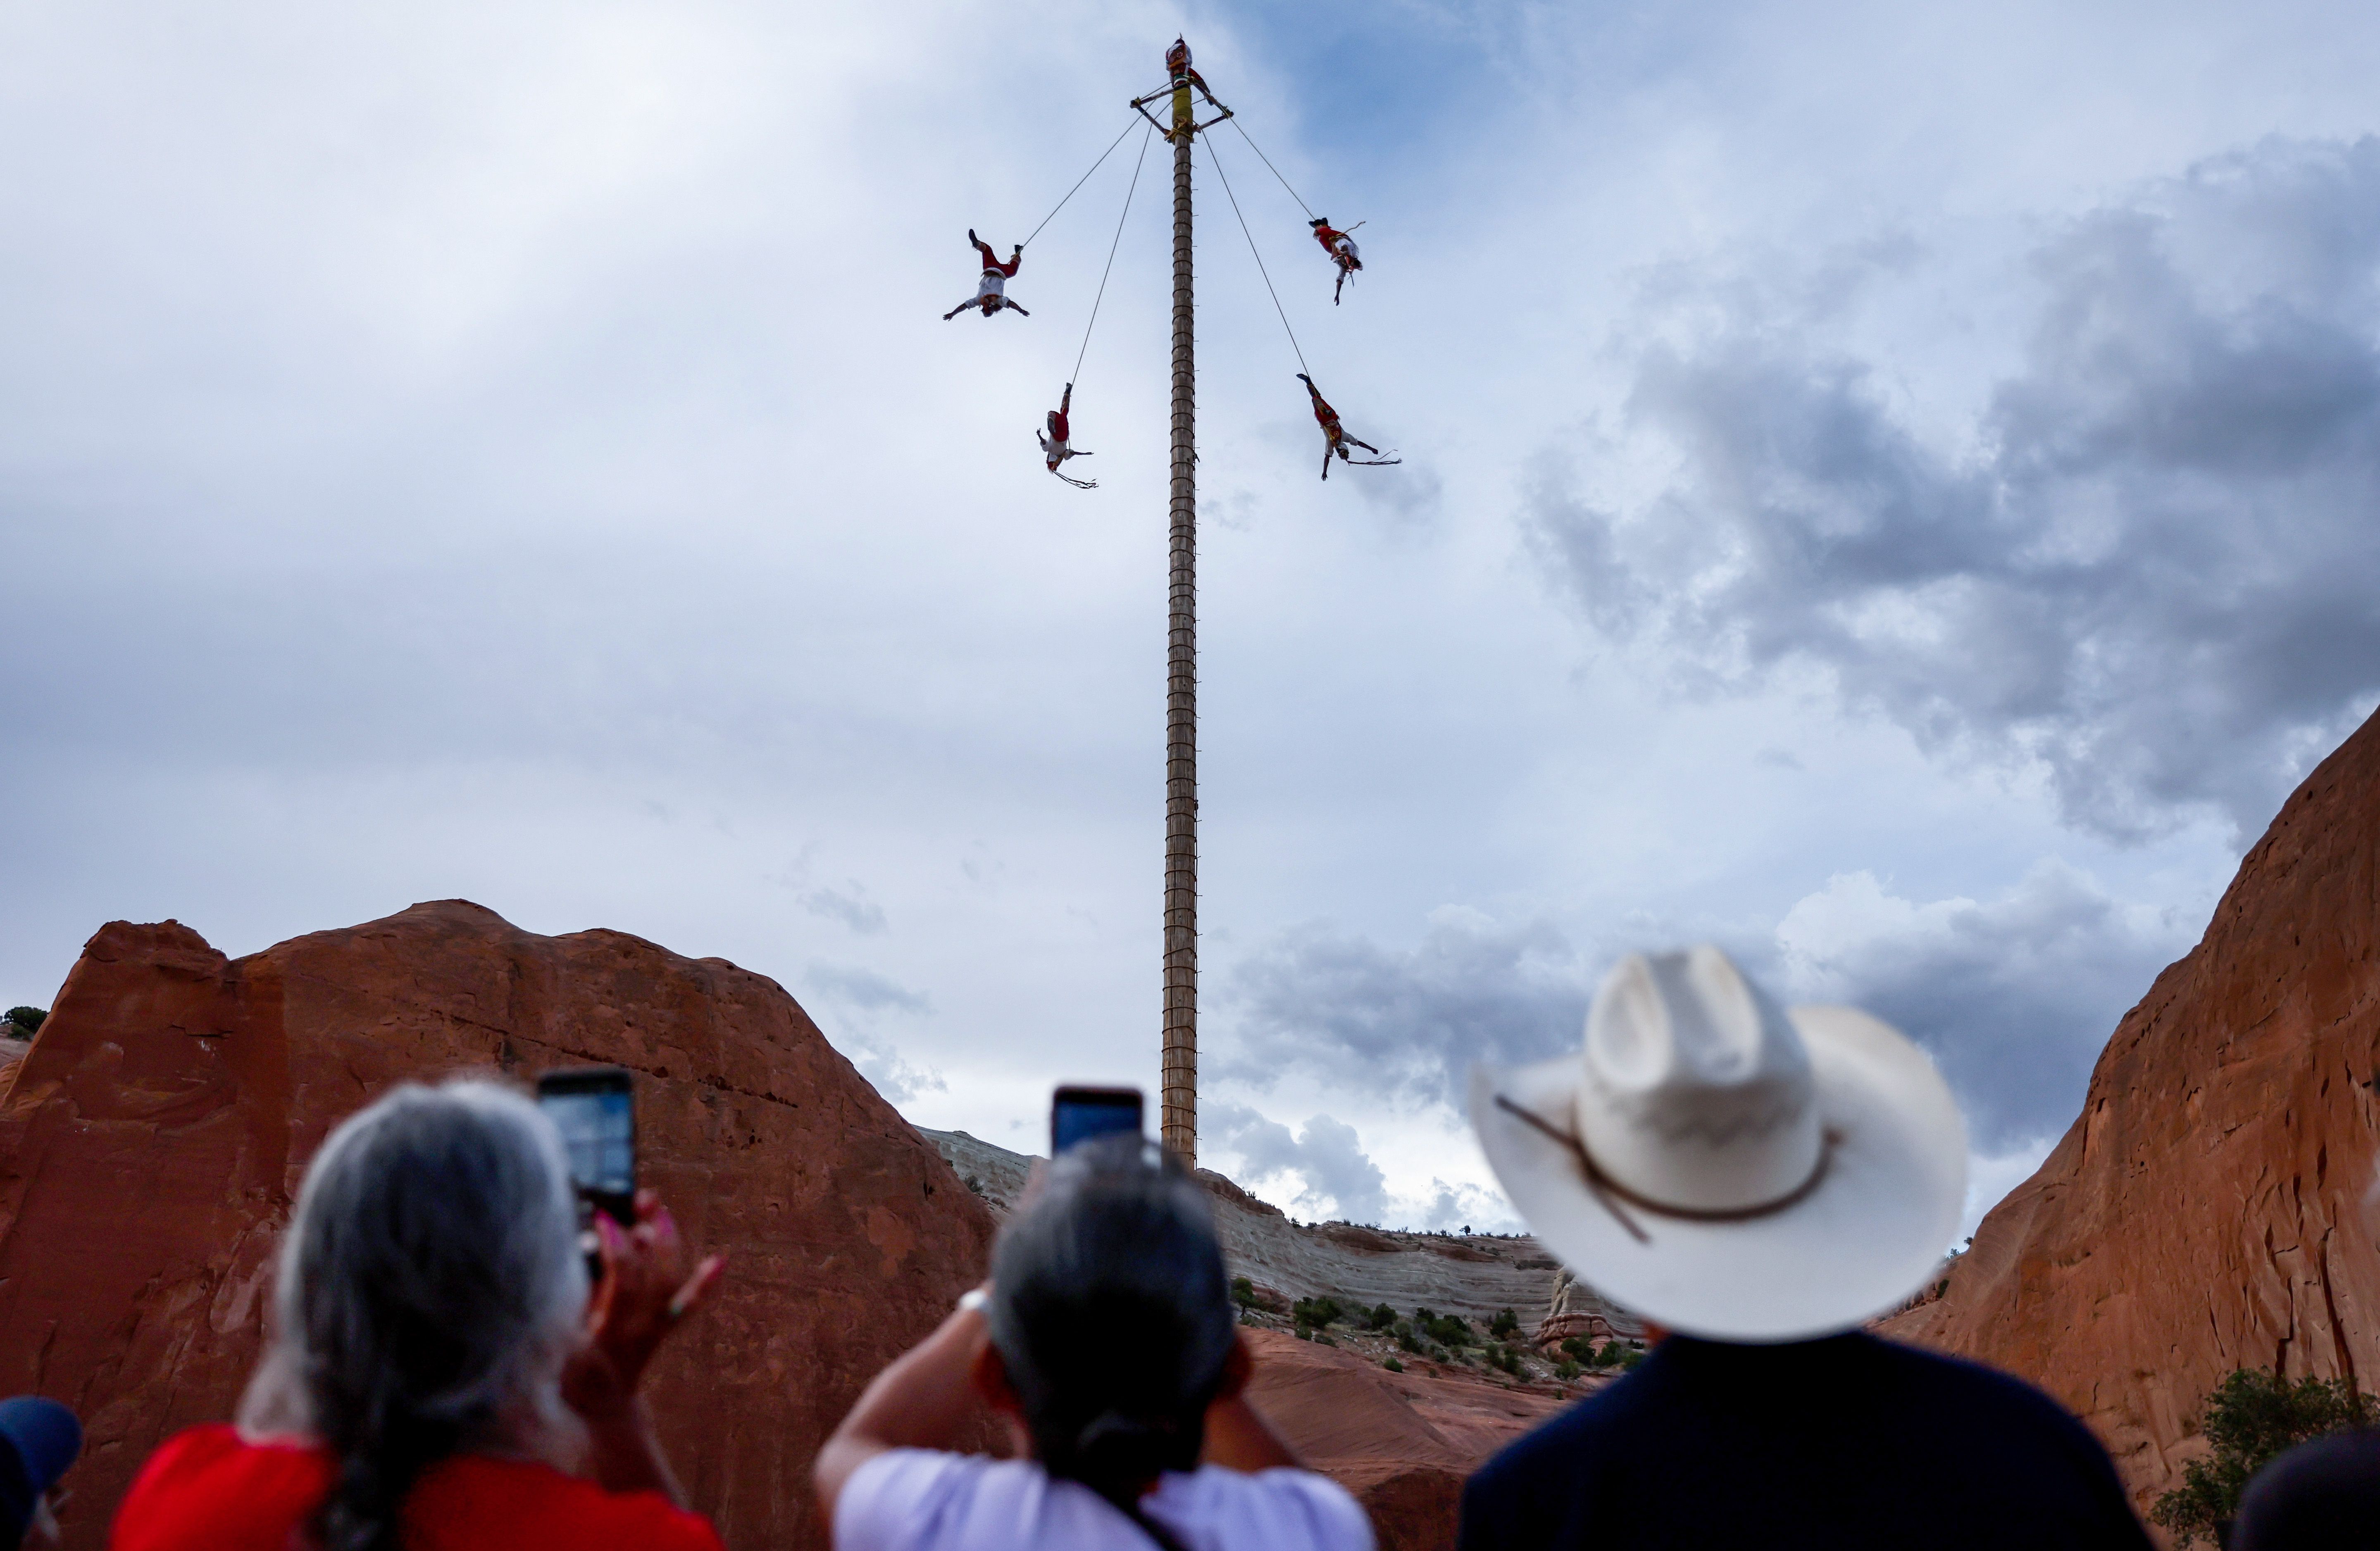 Traditional dancers from Mexico and the U.S. perform the Danza de los Voladores (Dance of the Flyers) at the 100th Gallup Inter-Tribal Indian Ceremonial at Red Rock Park  near Gallup, New Mexico.